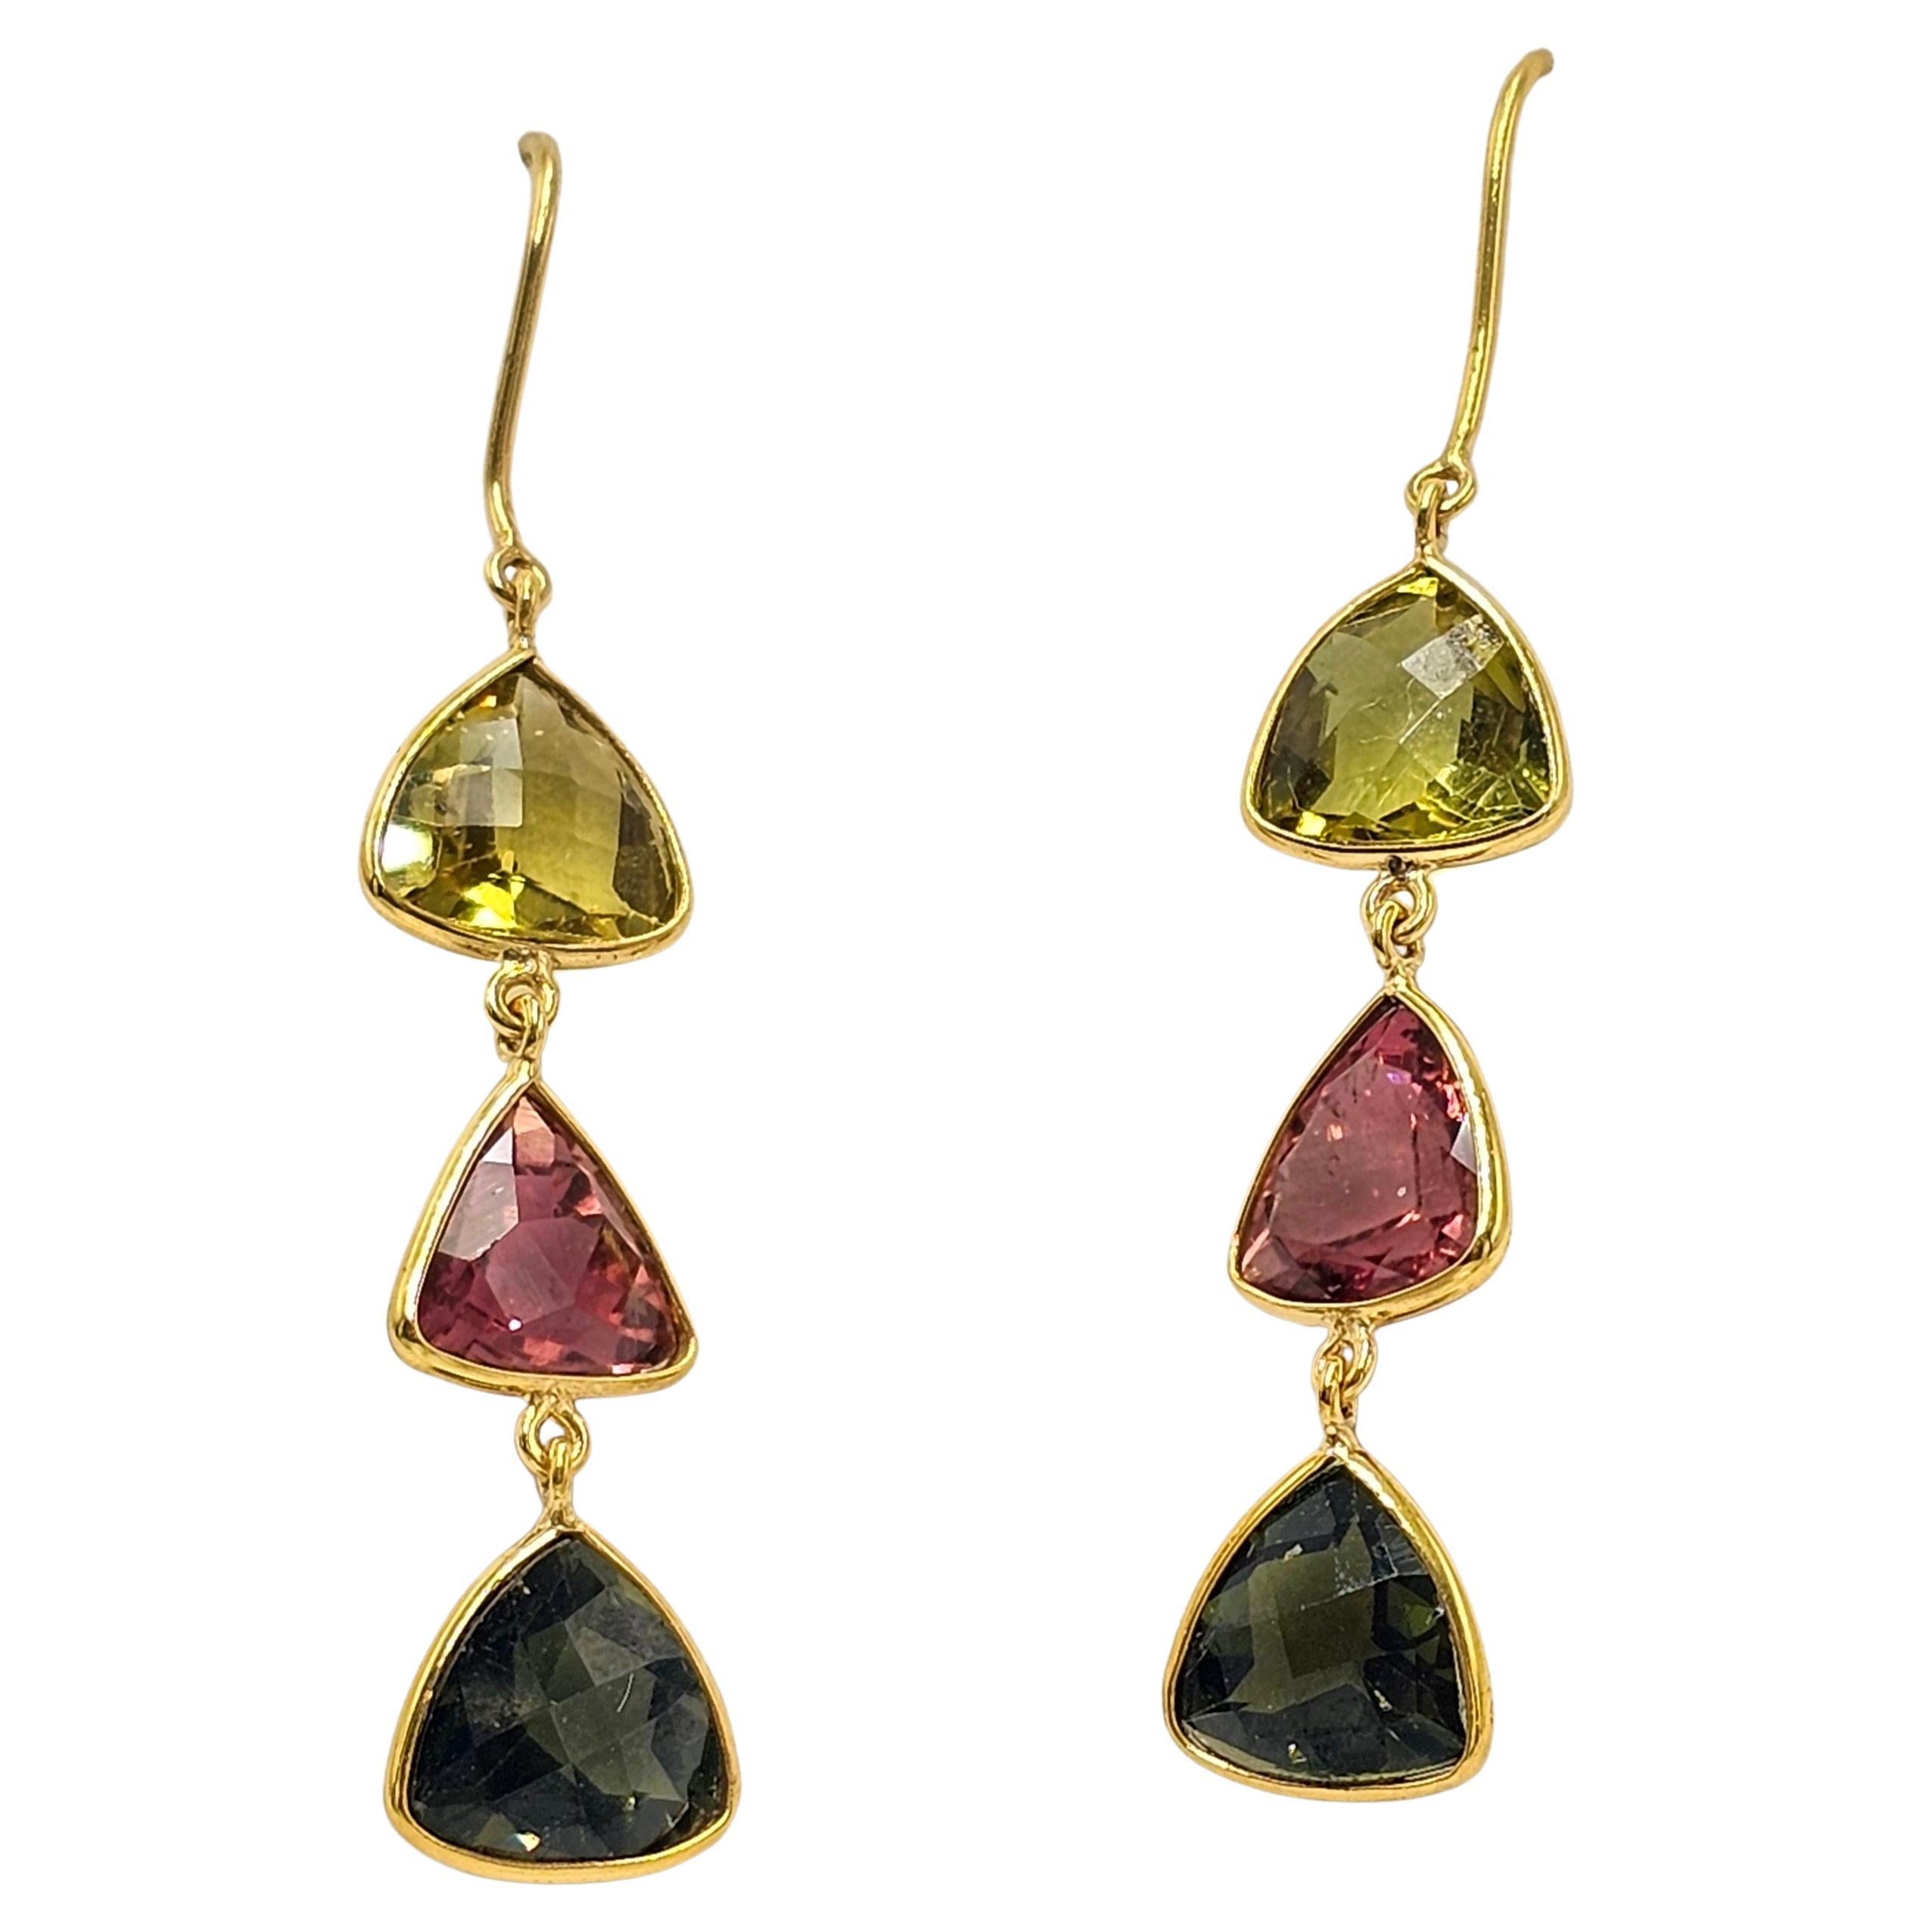 Multi Color tourmaline Earring hand crafted in 14K gold